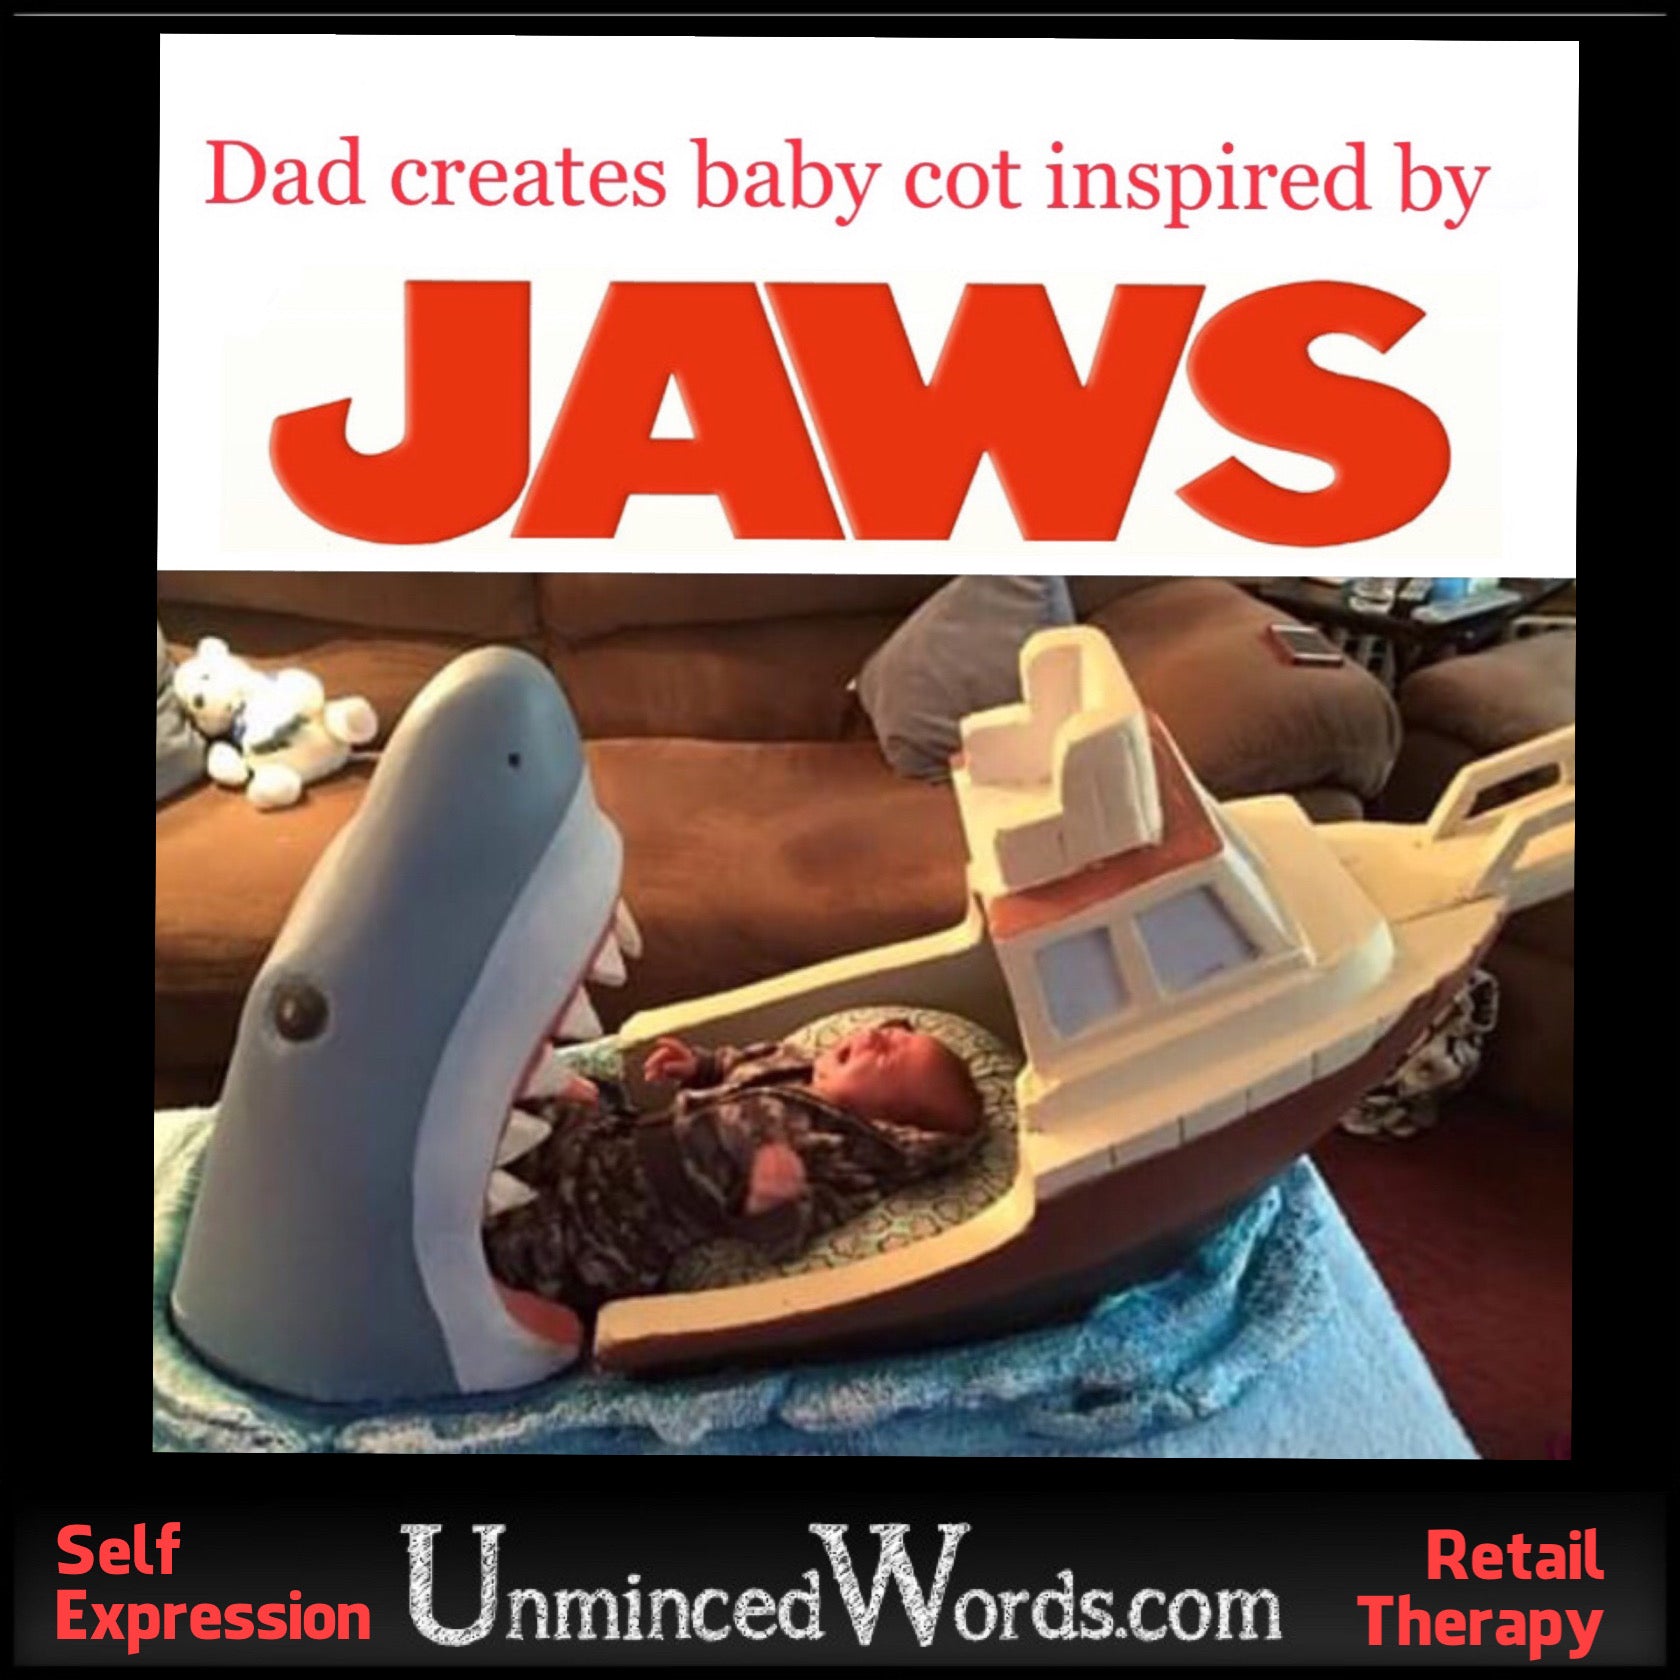 Jaws inspired kid’s bed is freaky